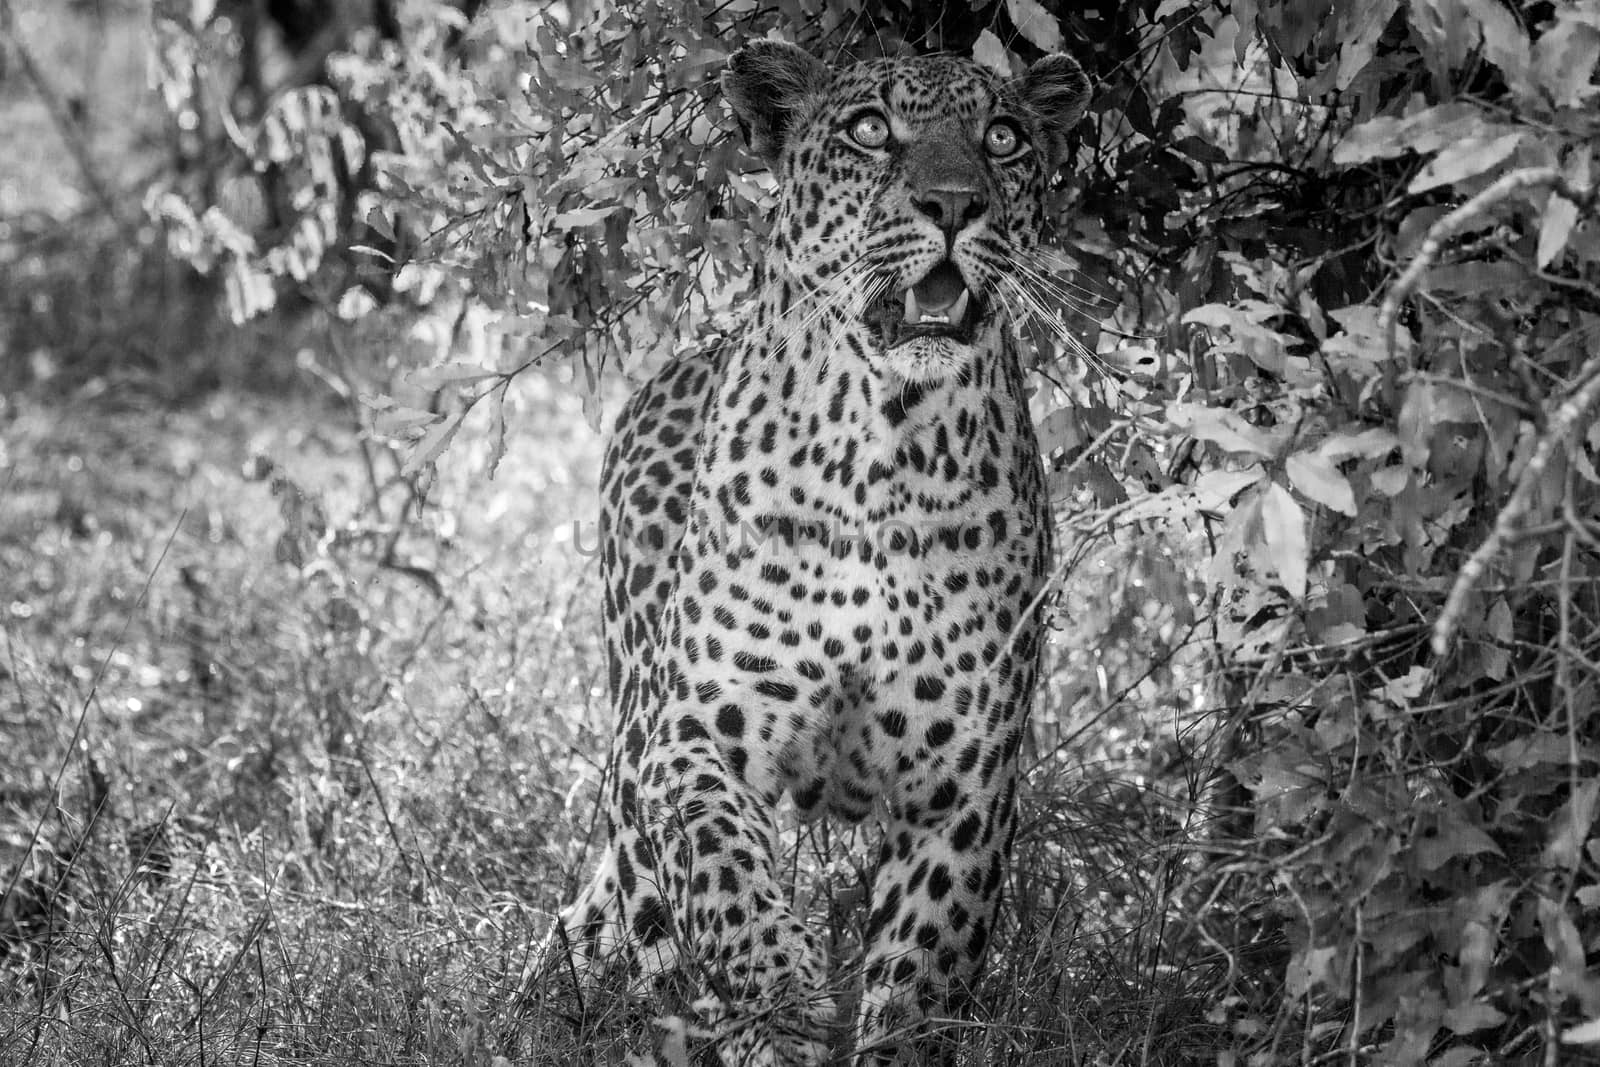 Leopard looking up in black and white in the Kruger National Park, South Africa.